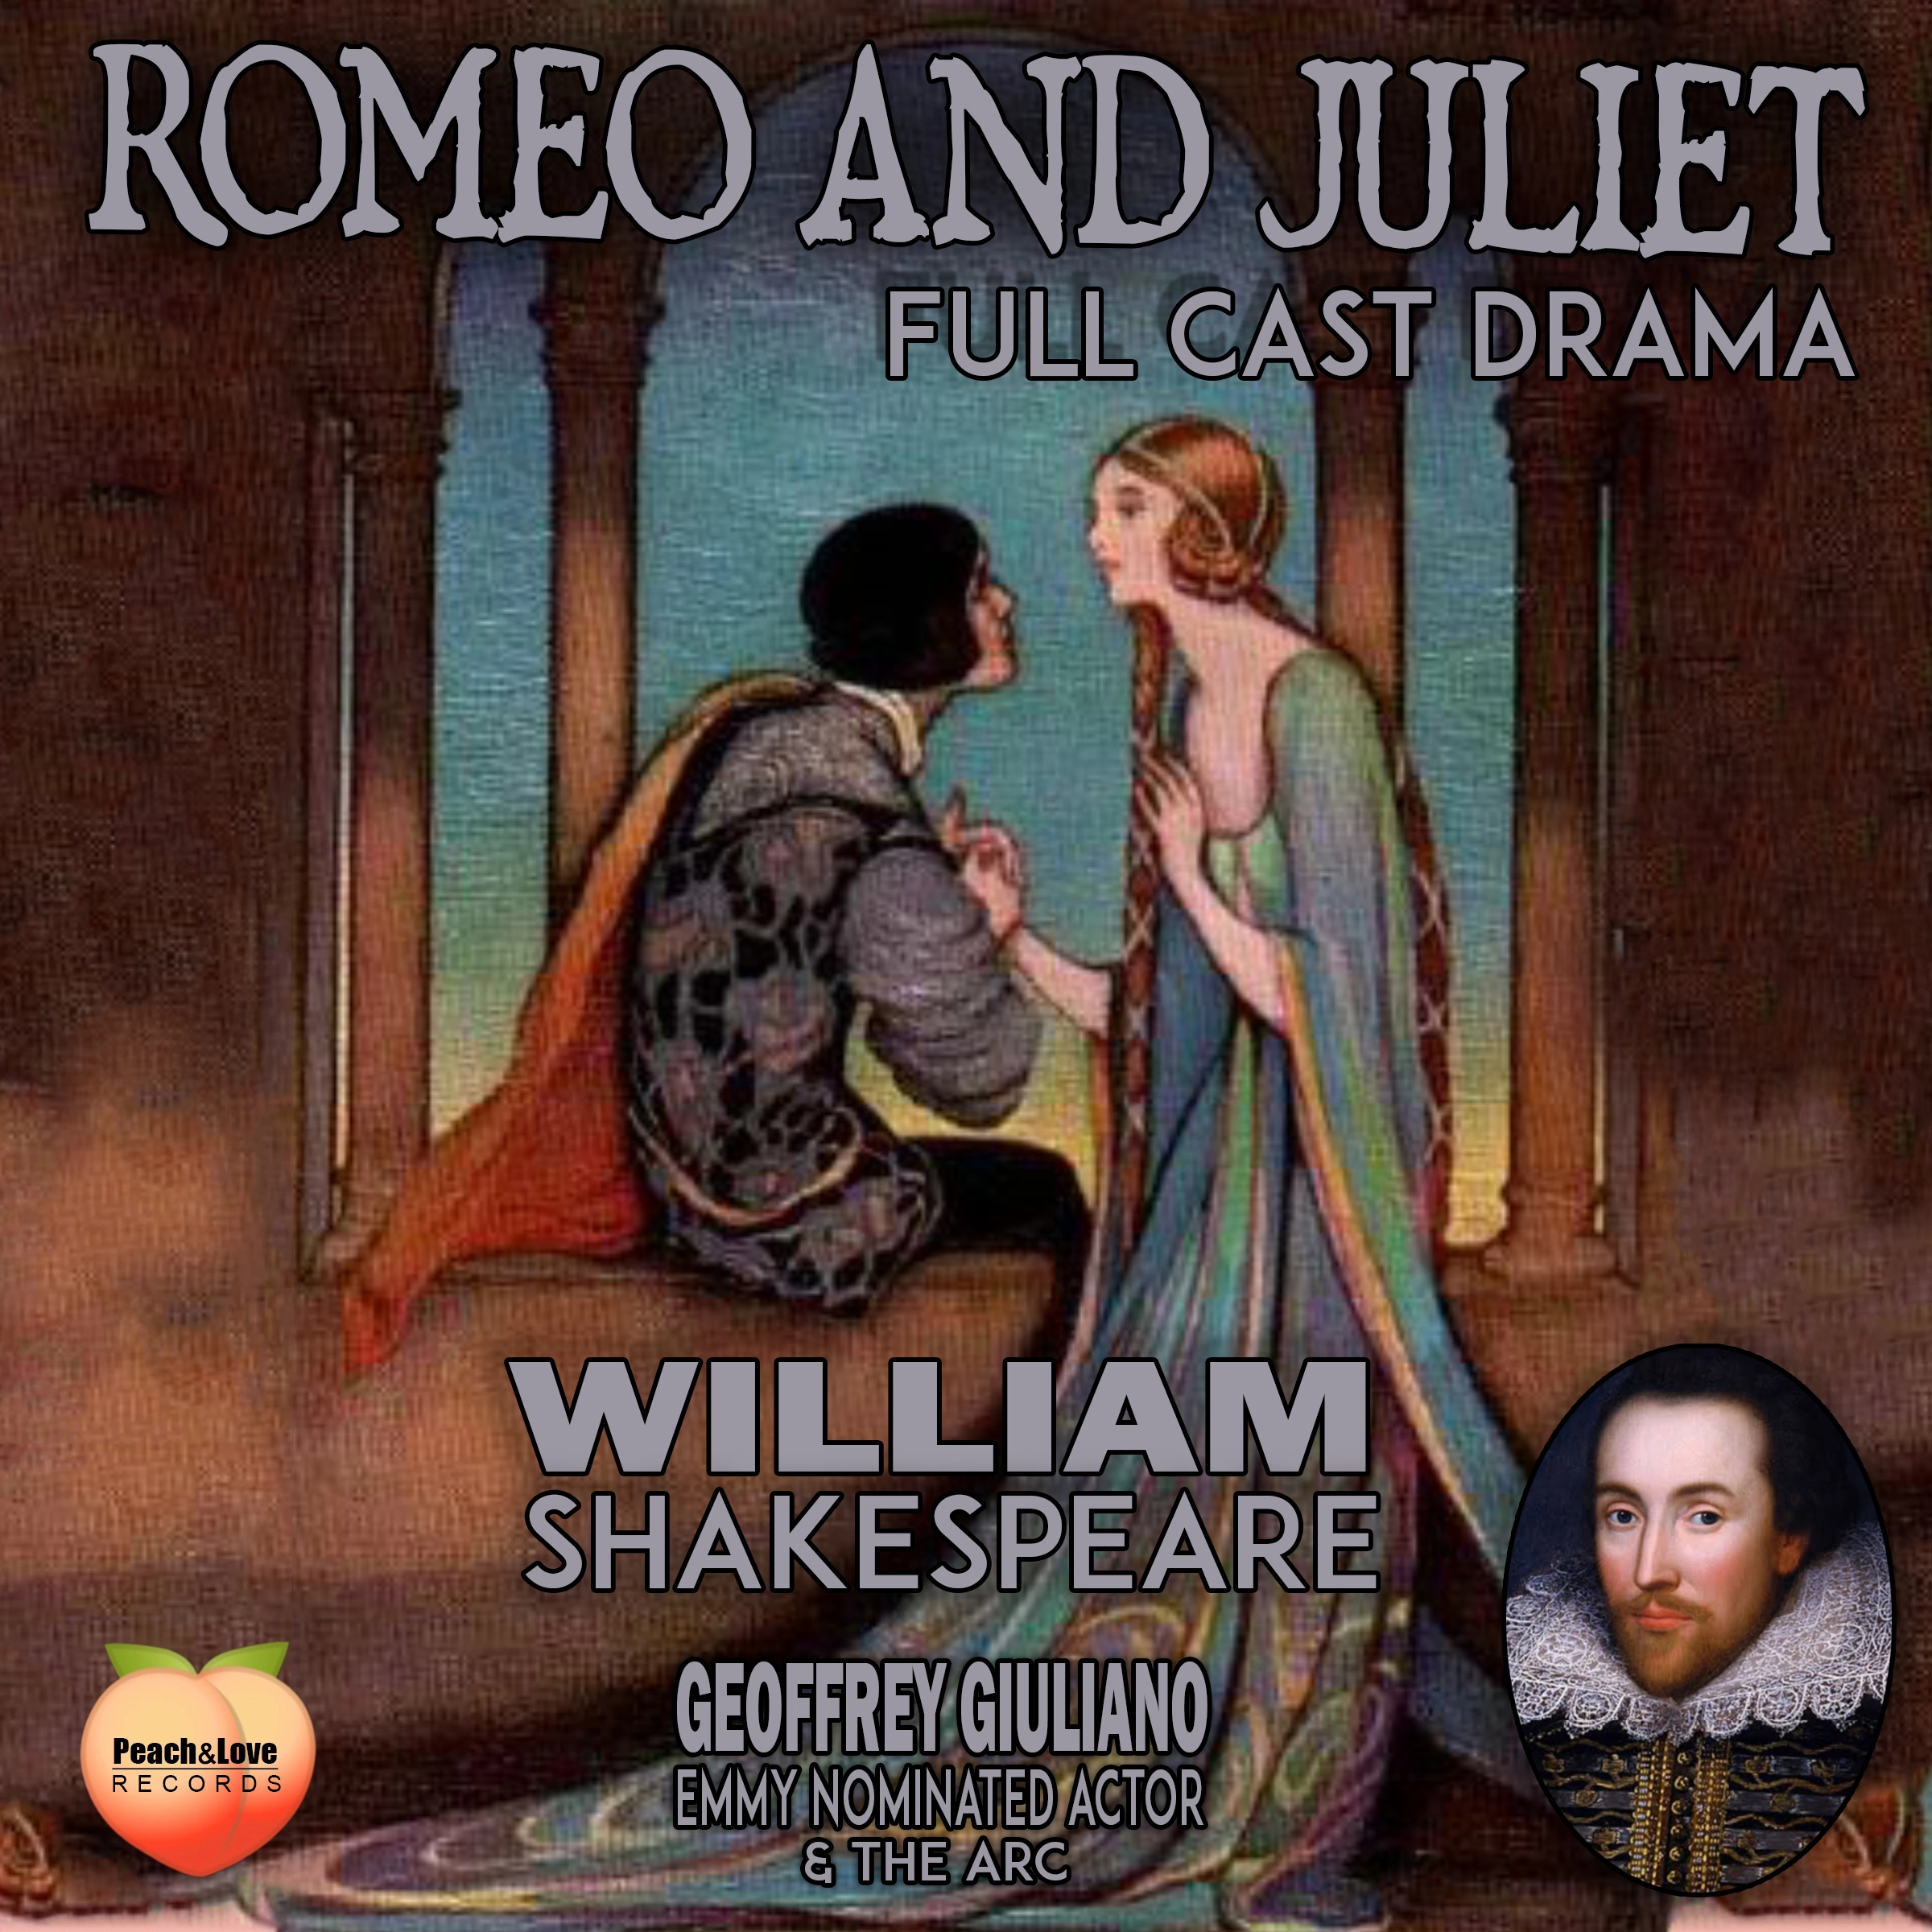 Romeo And Juliet by William Shakespeare Audiobook